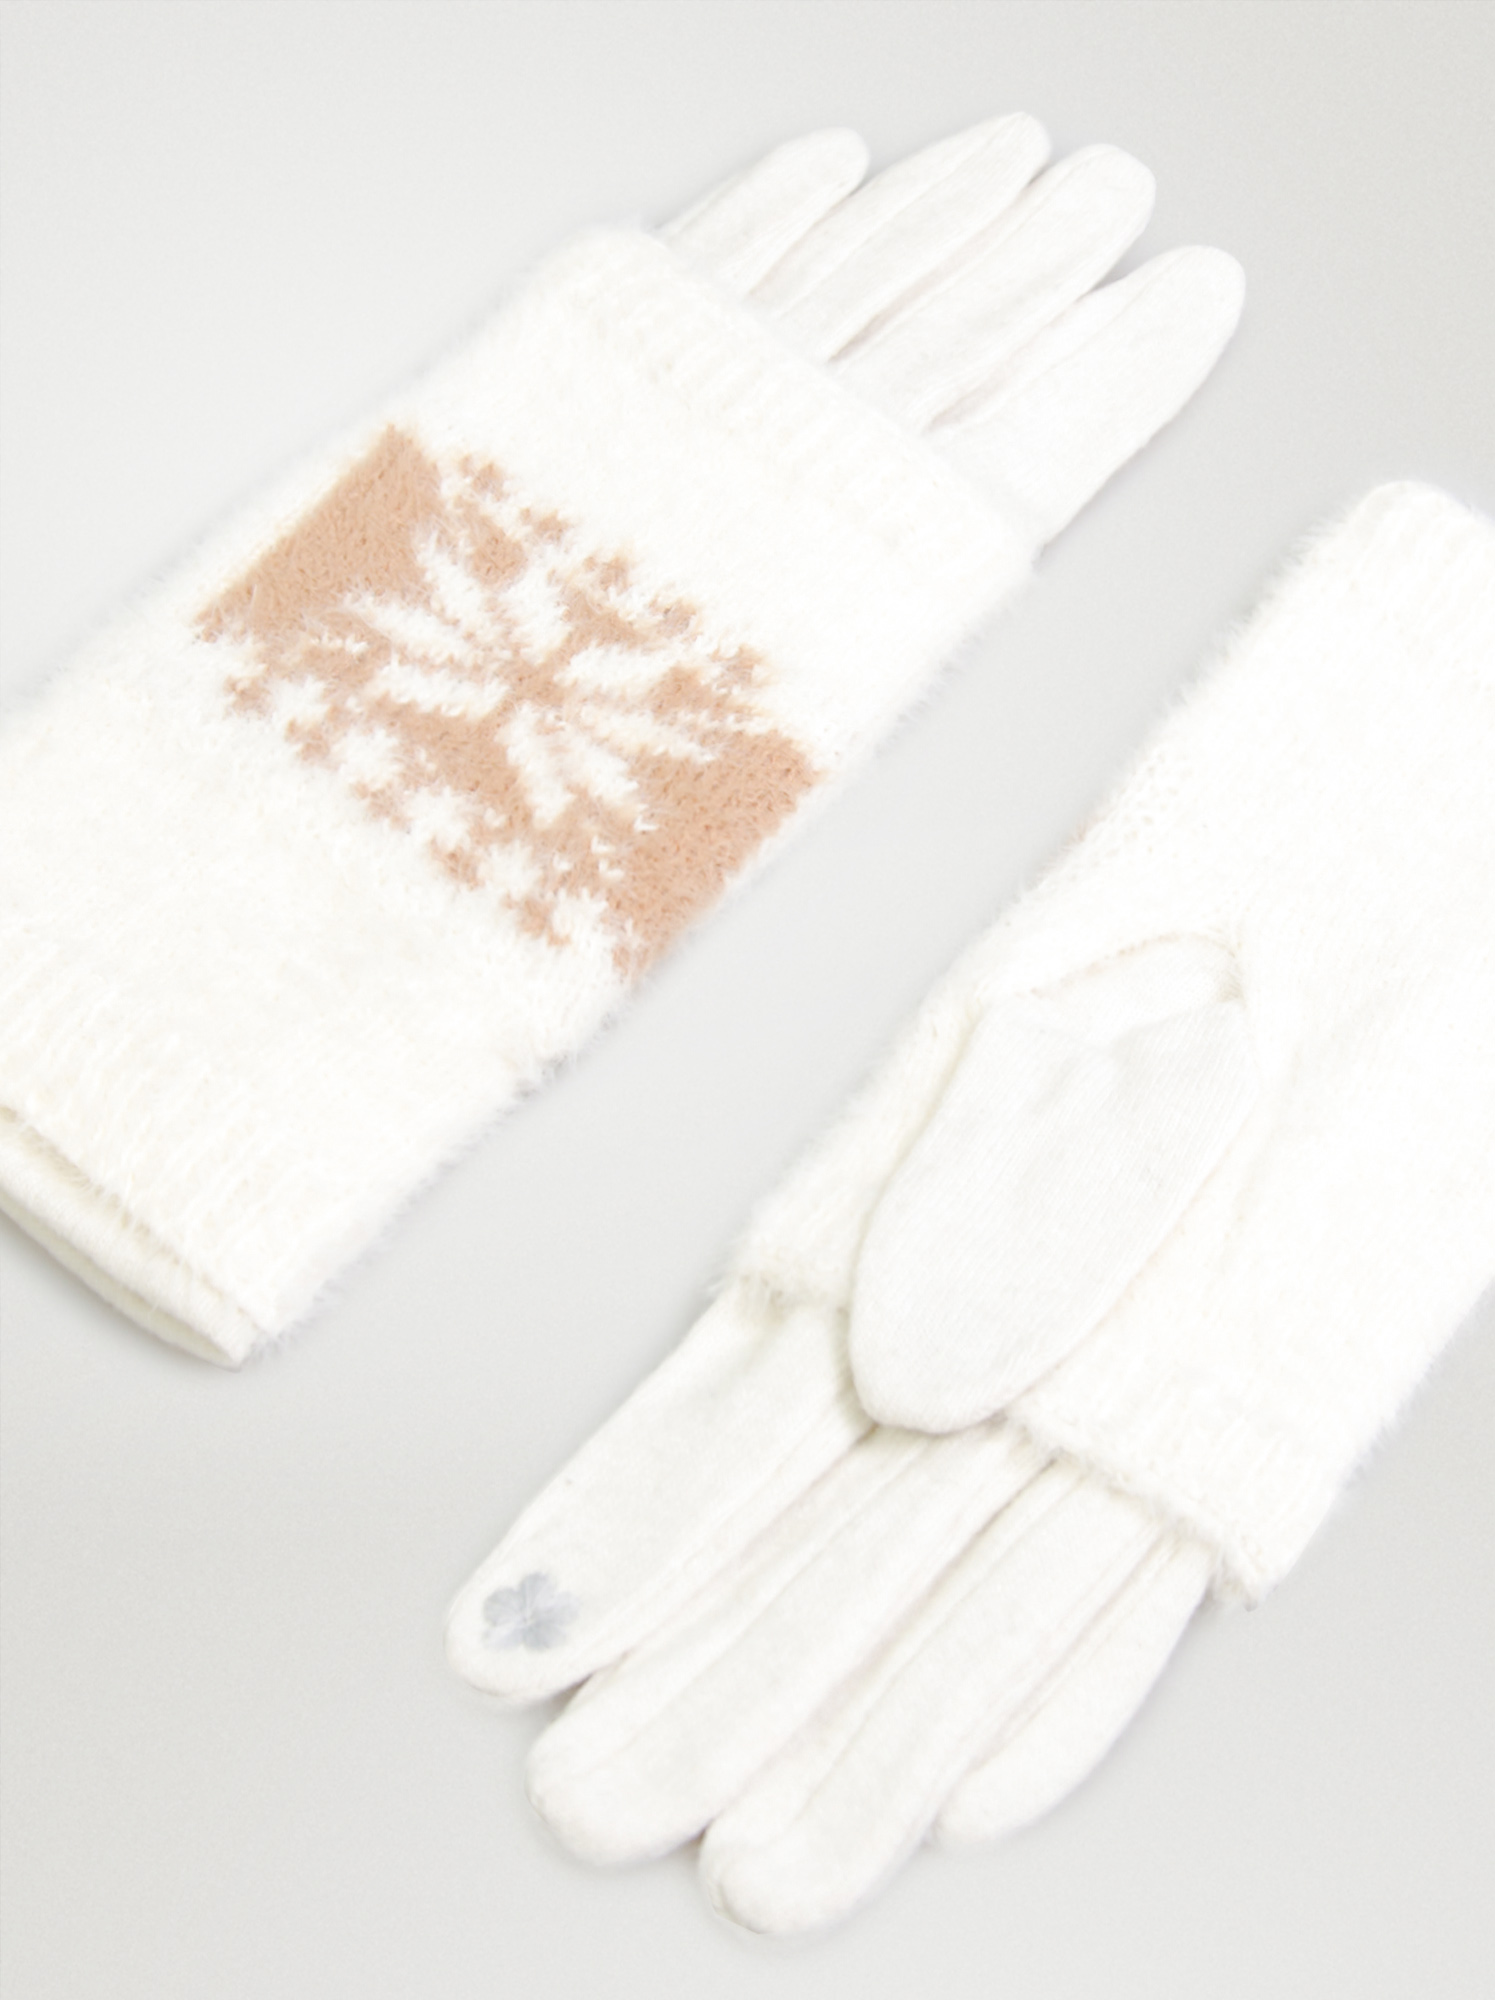 Two-piece gloves - Allora image 2